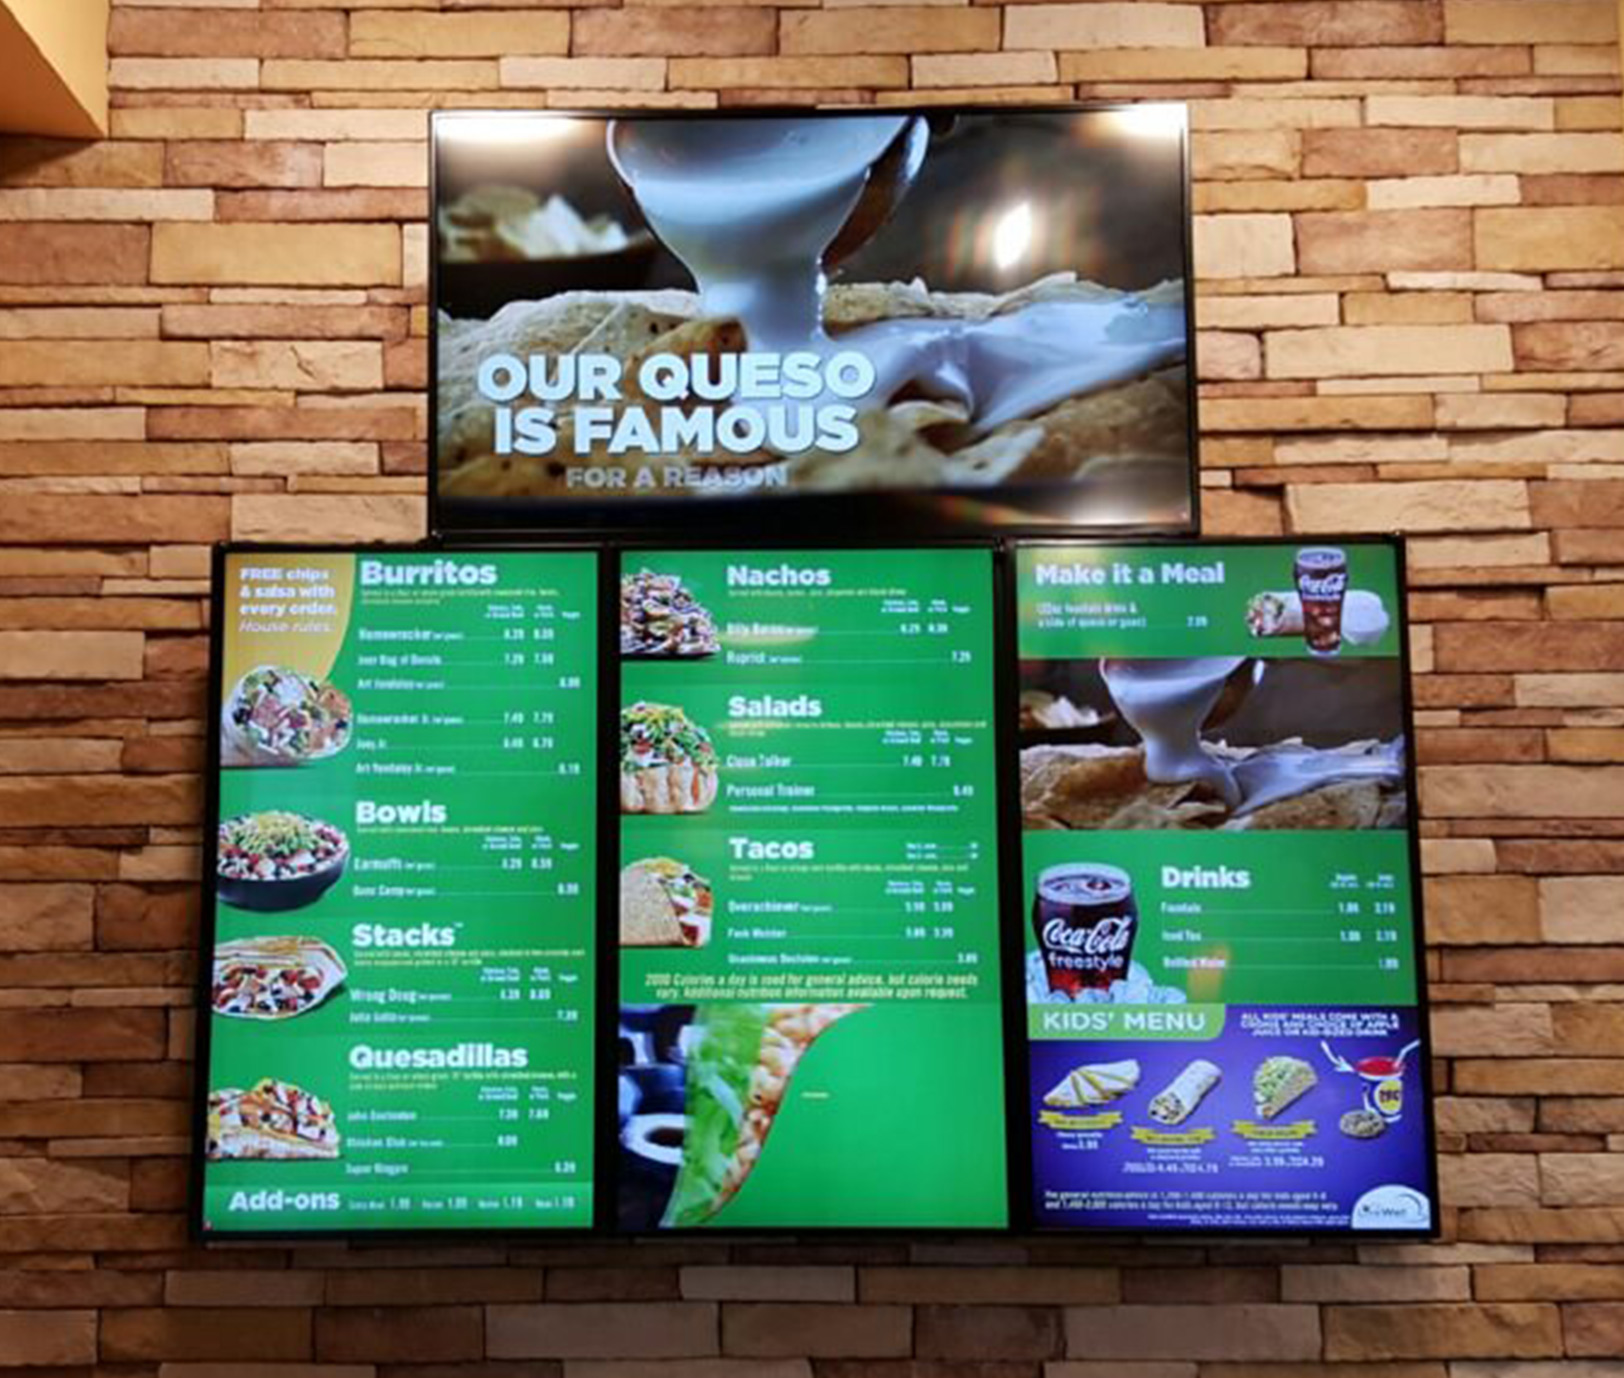 One large digital menu is mounted above three vibrant vertical menu boards showing images of tacos, nachos, and drinks.